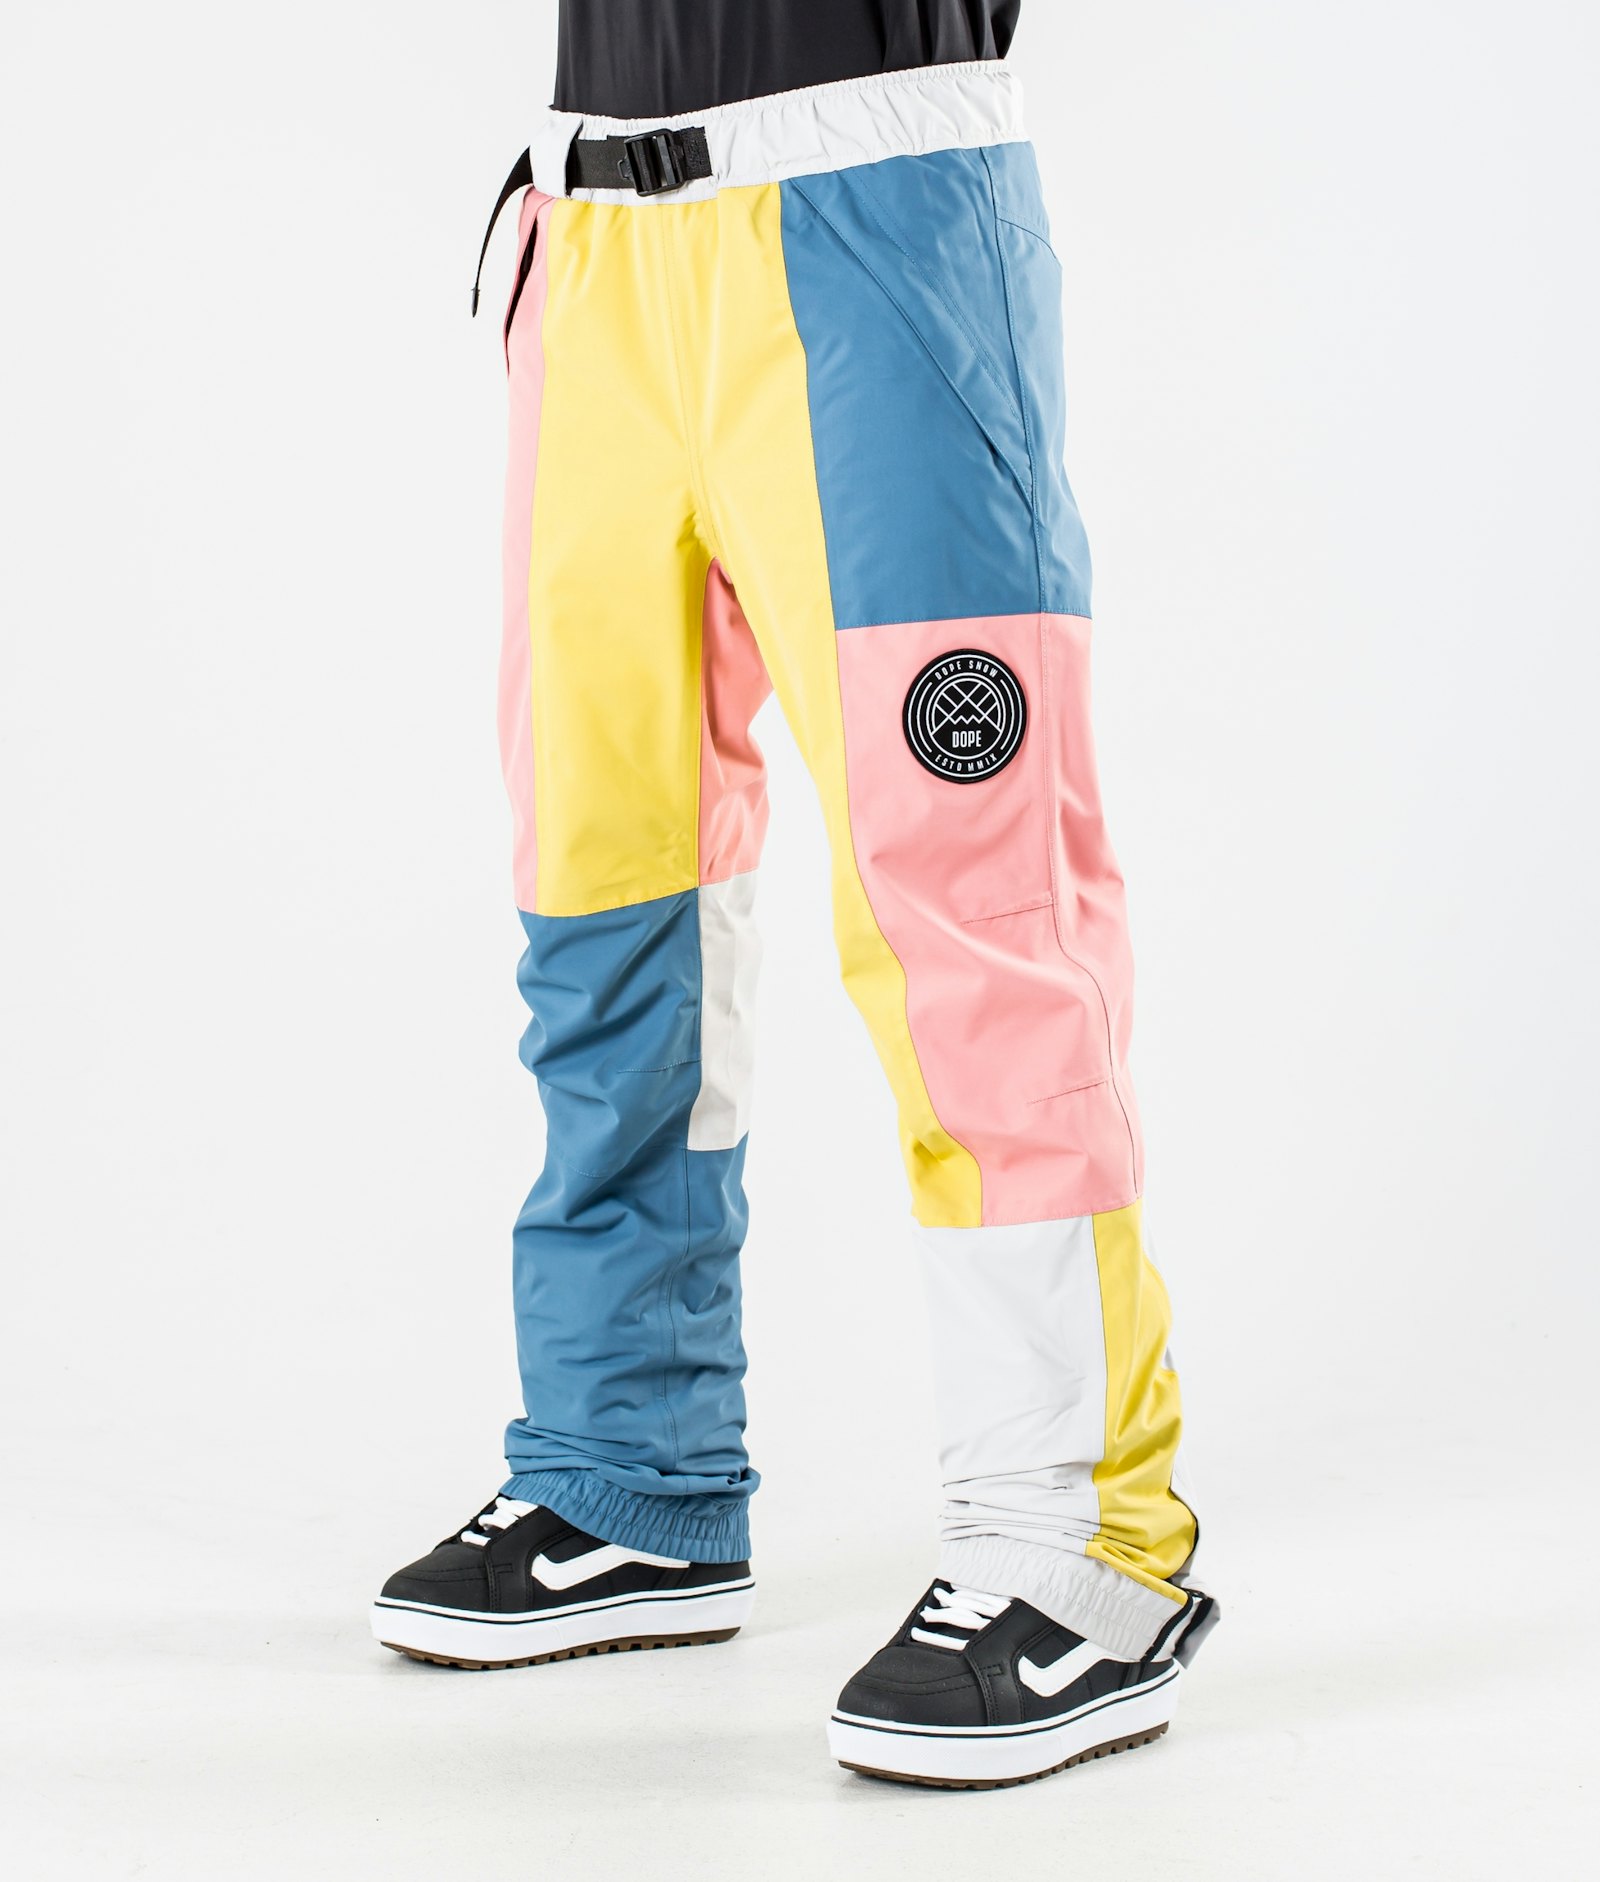 Dope Blizzard W 2020 Pantalones Snowboard Mujer Pink Patchwork